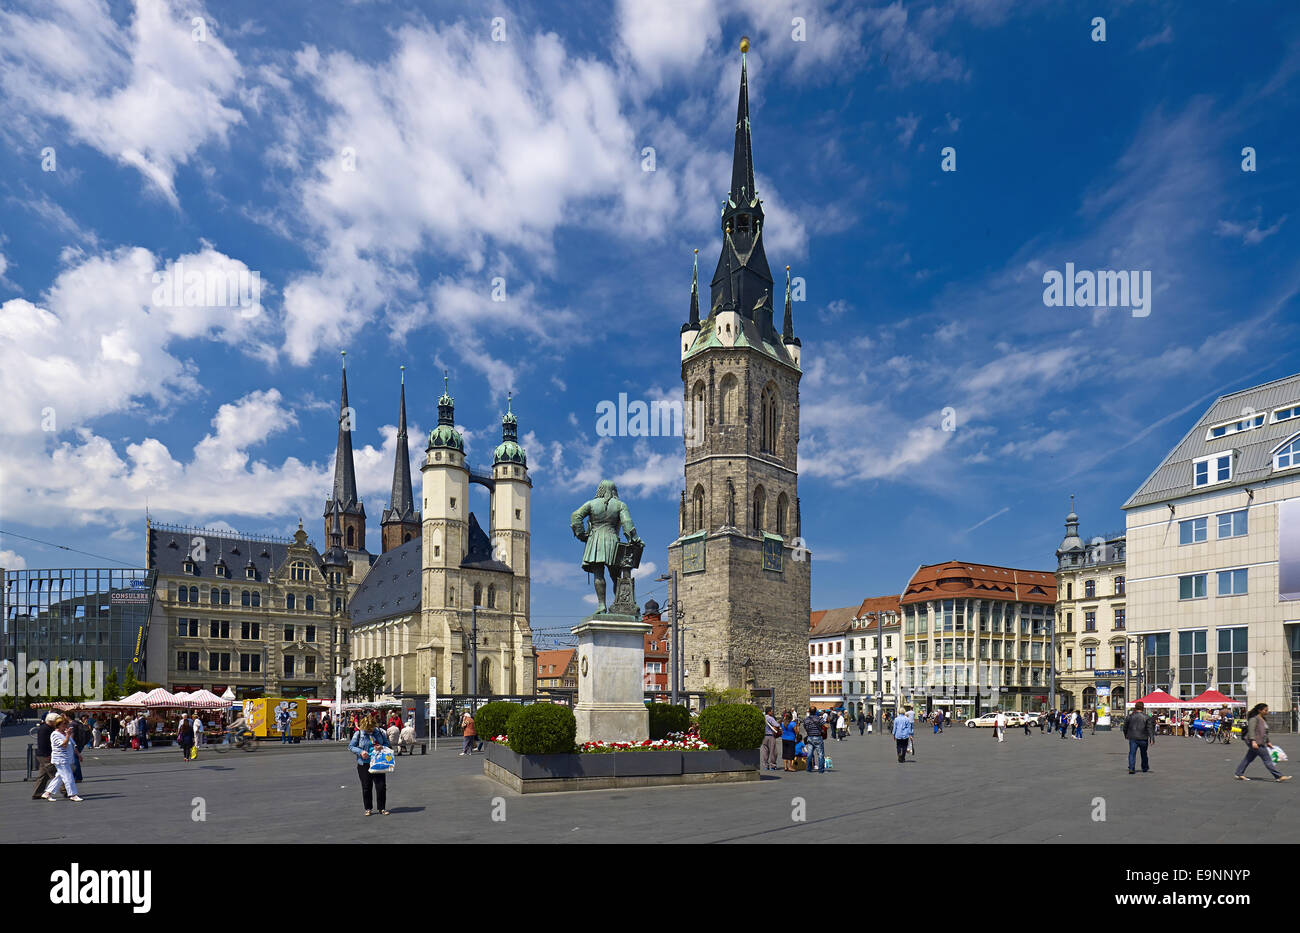 Market with Church of St. Mary, Haendel Statue and Red Tower in Halle, Germany Stock Photo